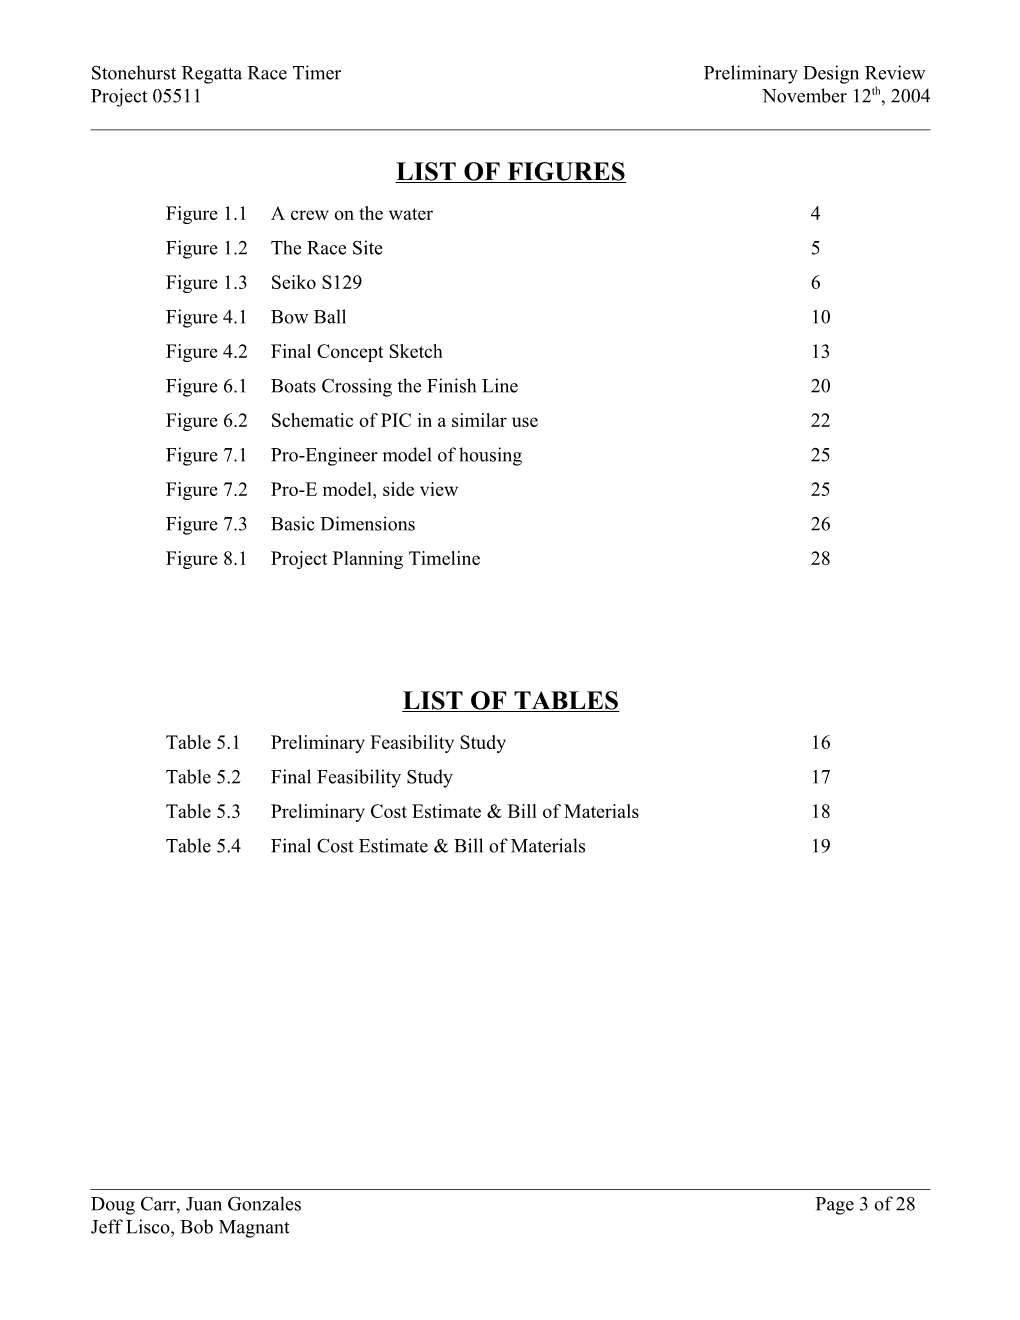 Table of Contents s310